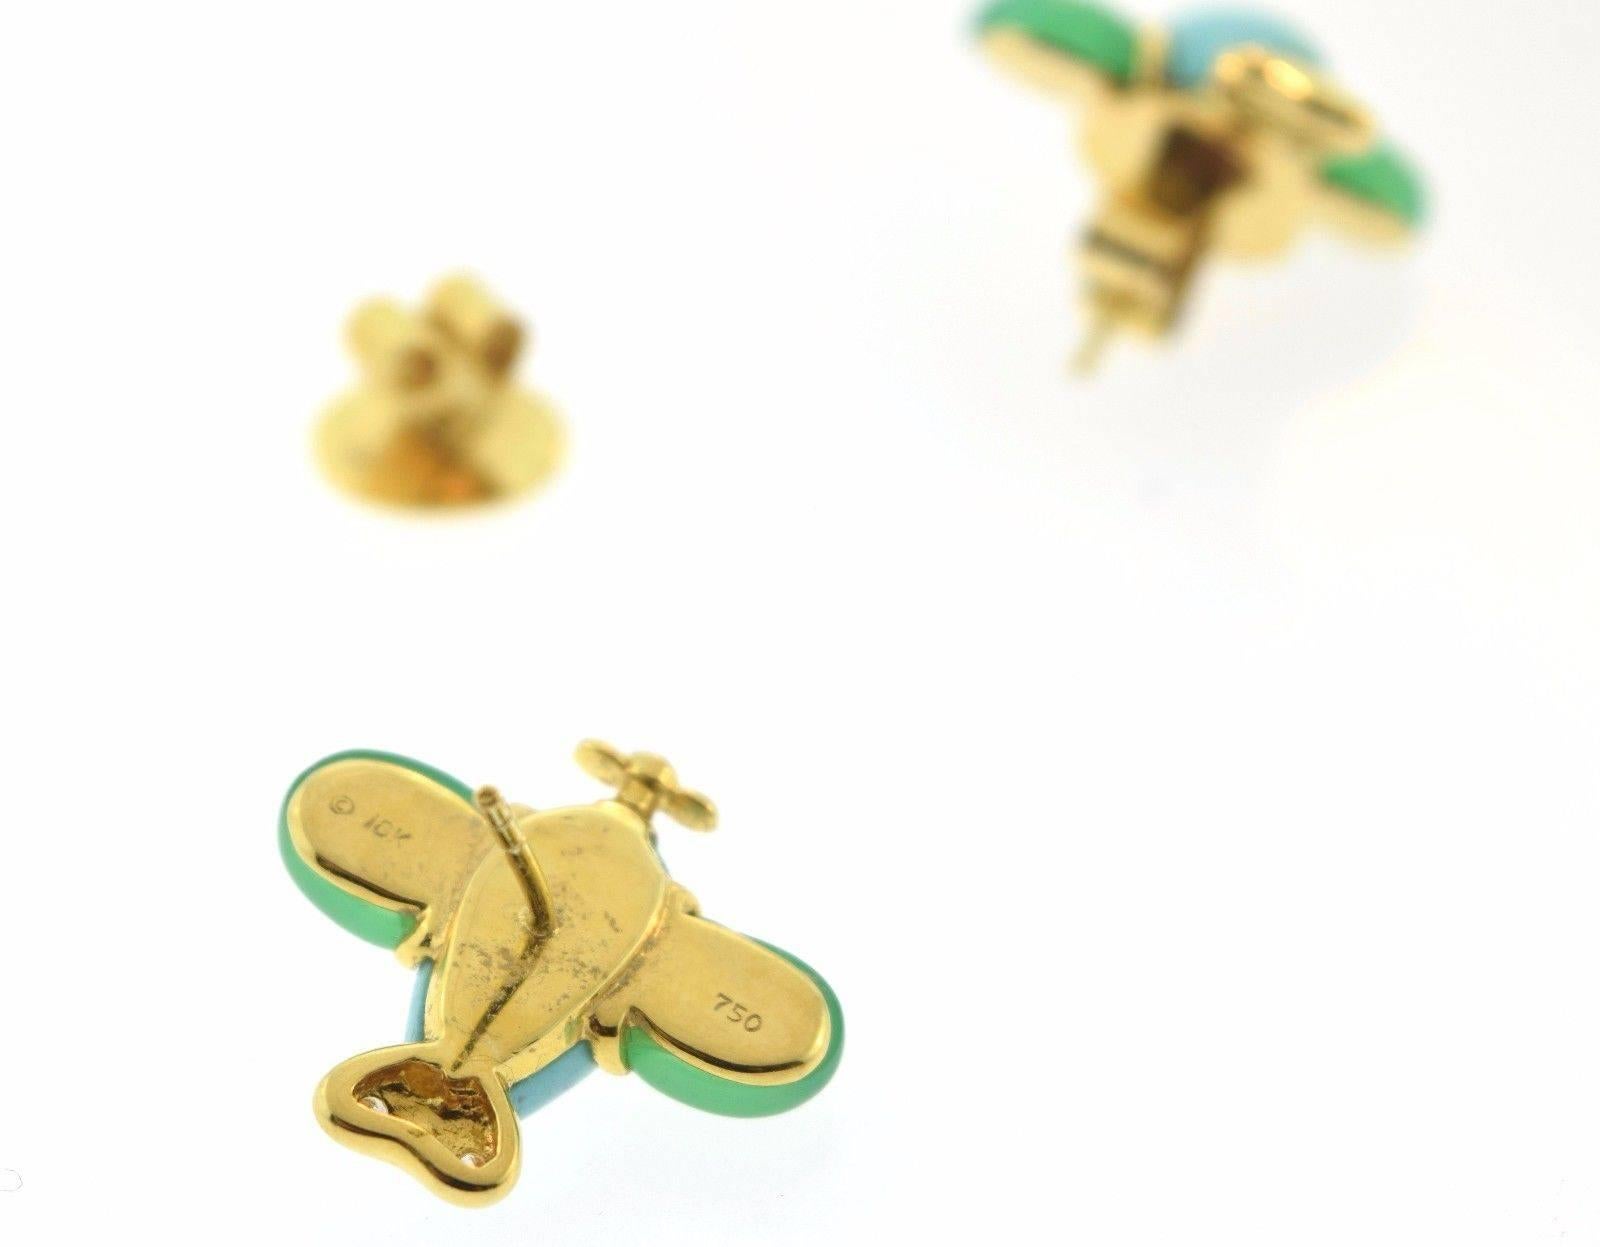 Turquoise and Chrysoprase Airplane Earrings with Diamonds, 18 Karat Yellow Gold In Excellent Condition For Sale In Miami, FL